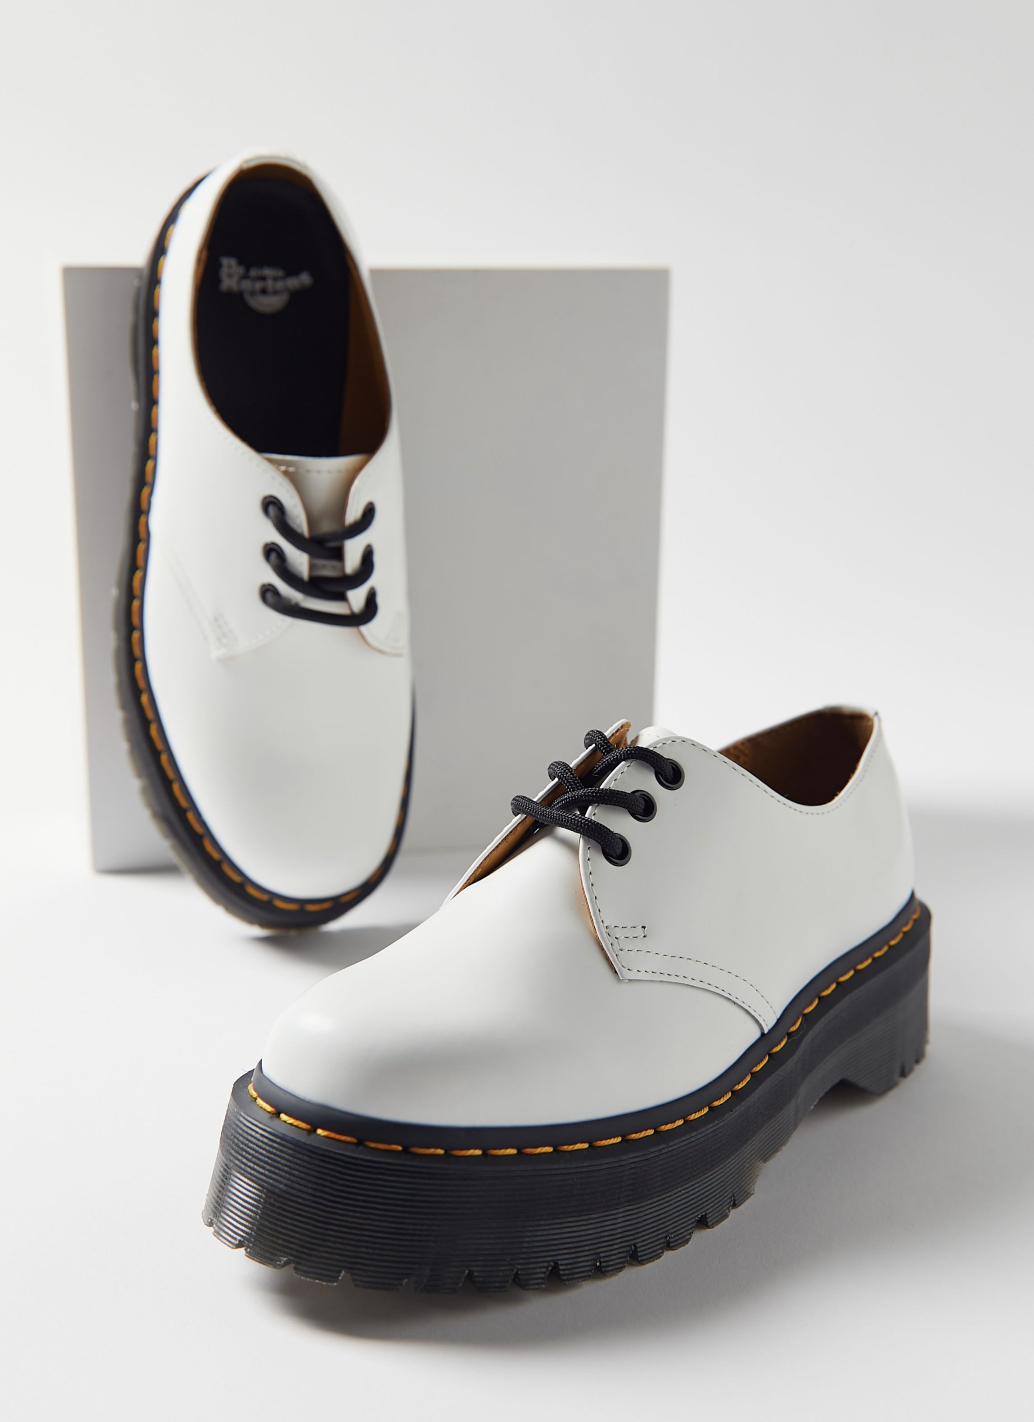 Urban outfitters 现有Dr. Martens 1461 Oxford 女鞋